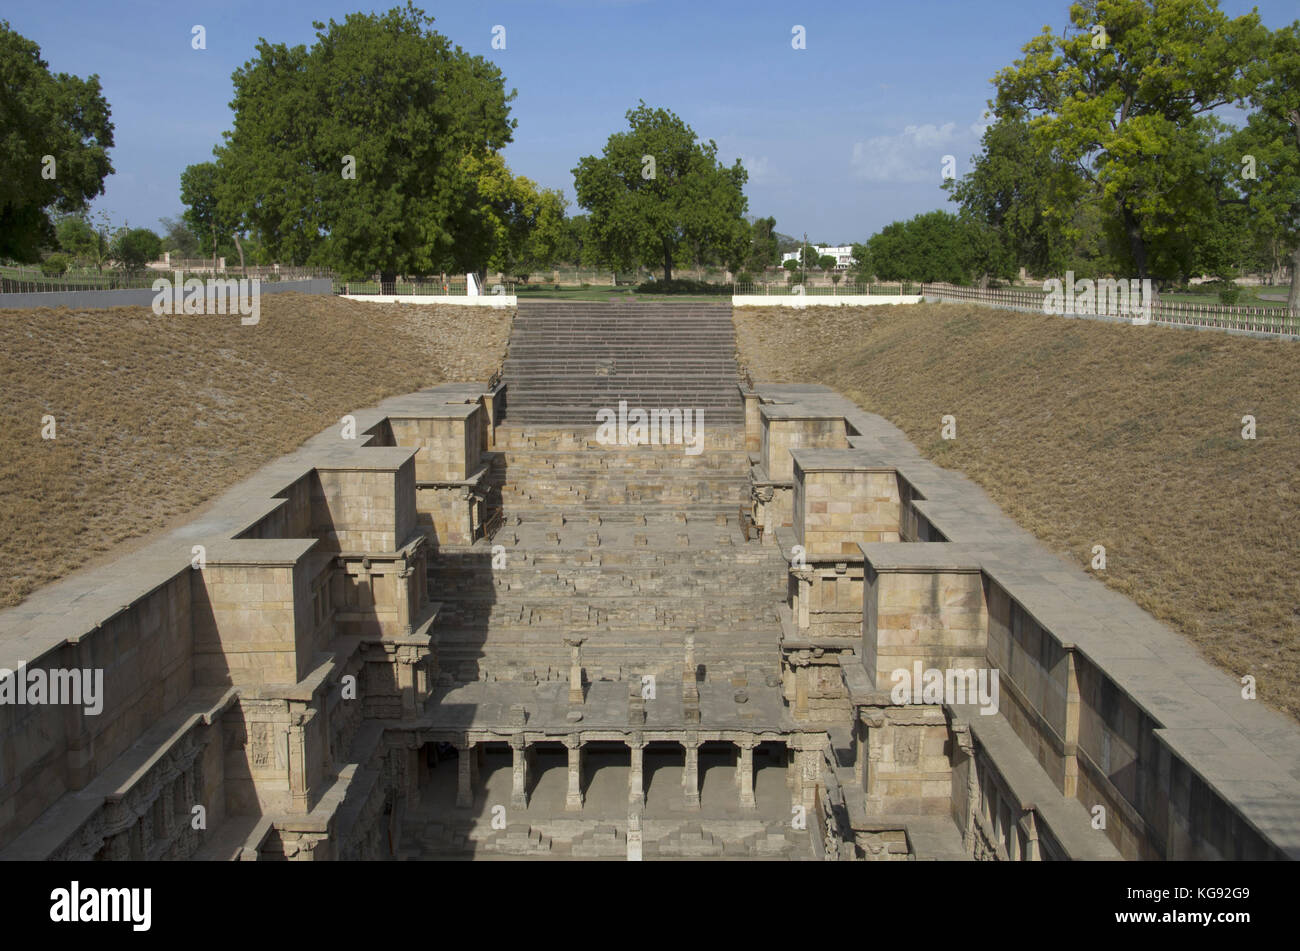 Outer view of Rani ki vav, an intricately constructed stepwell on the banks of Saraswati River. Memorial to an 11th century AD King Bhimdev I. Stock Photo